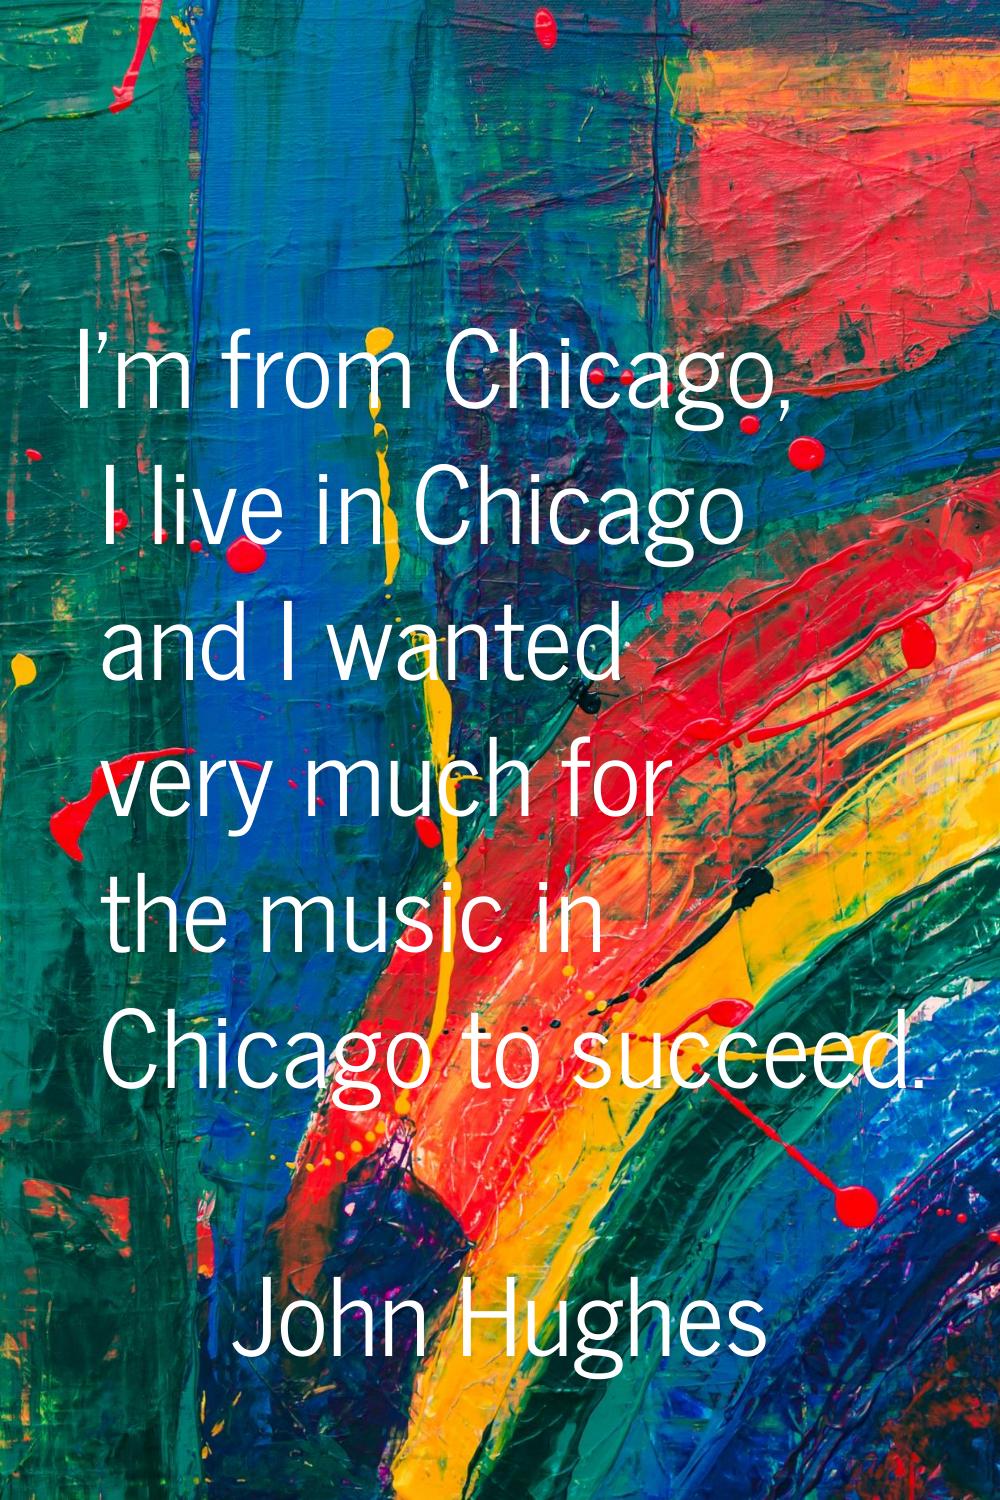 I'm from Chicago, I live in Chicago and I wanted very much for the music in Chicago to succeed.